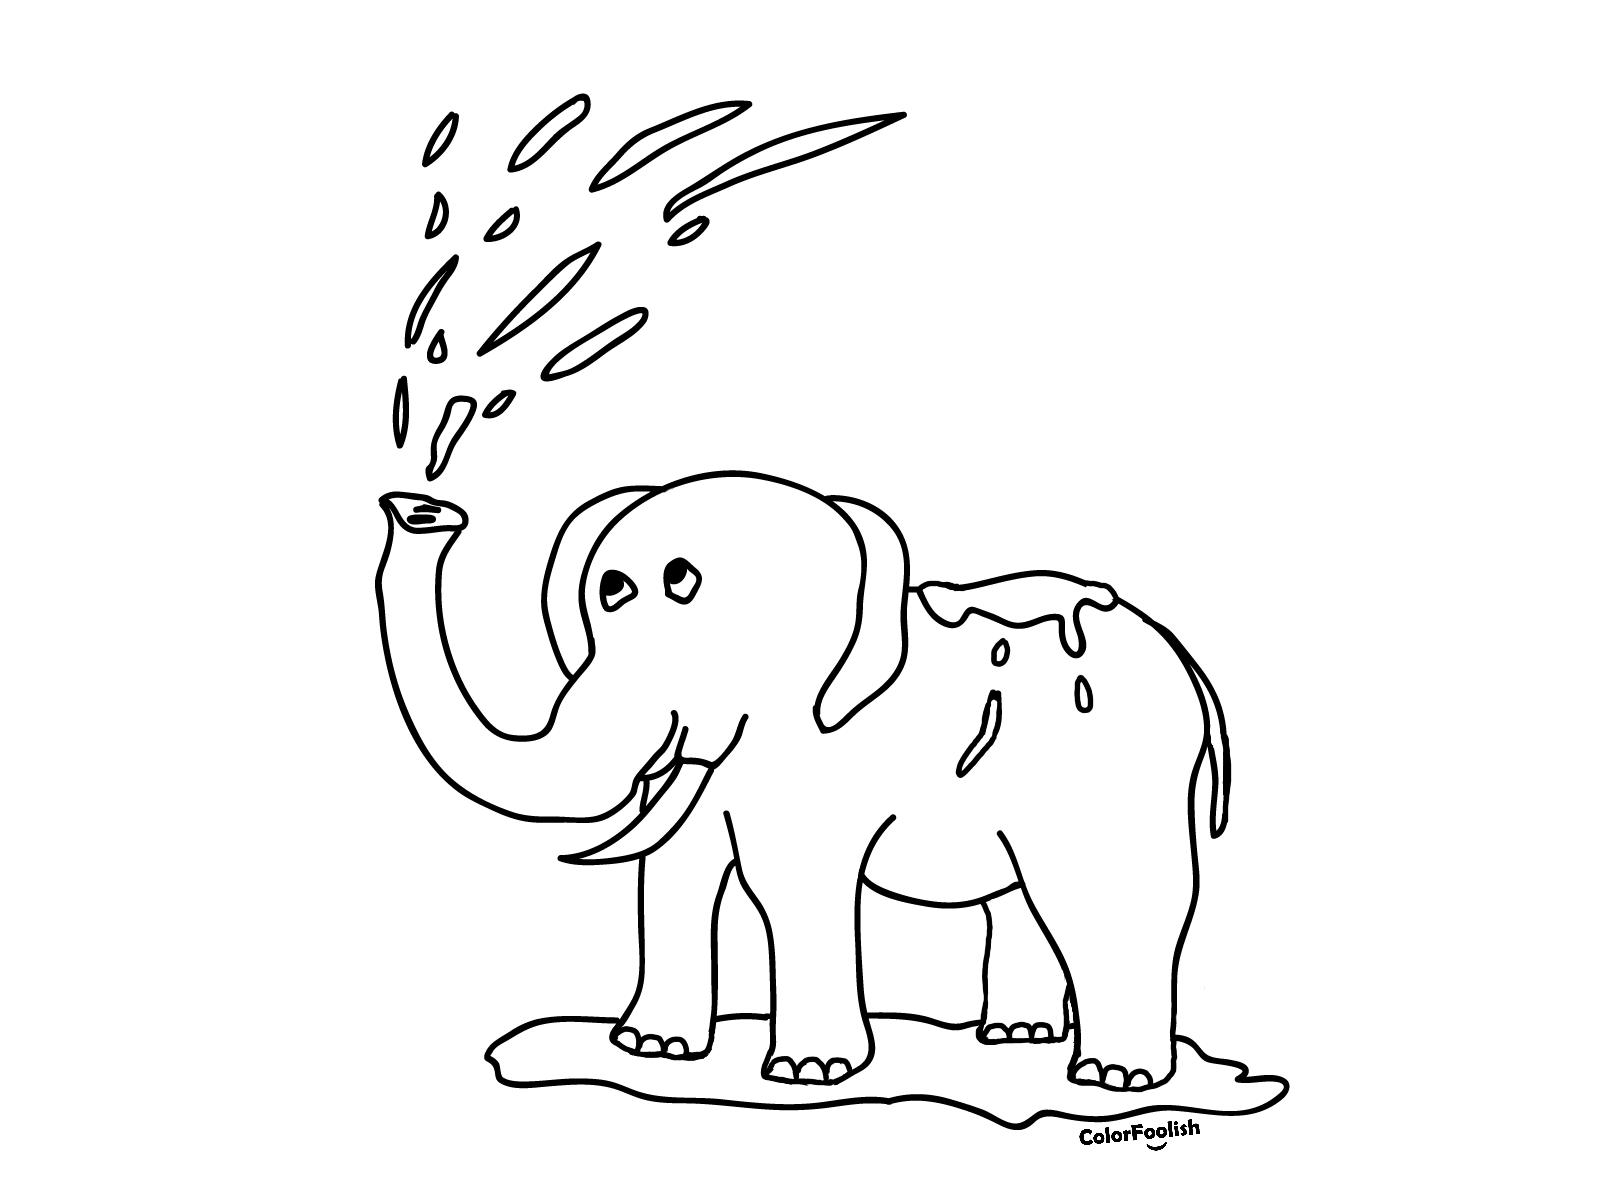 Coloring page of an elephant playing with water